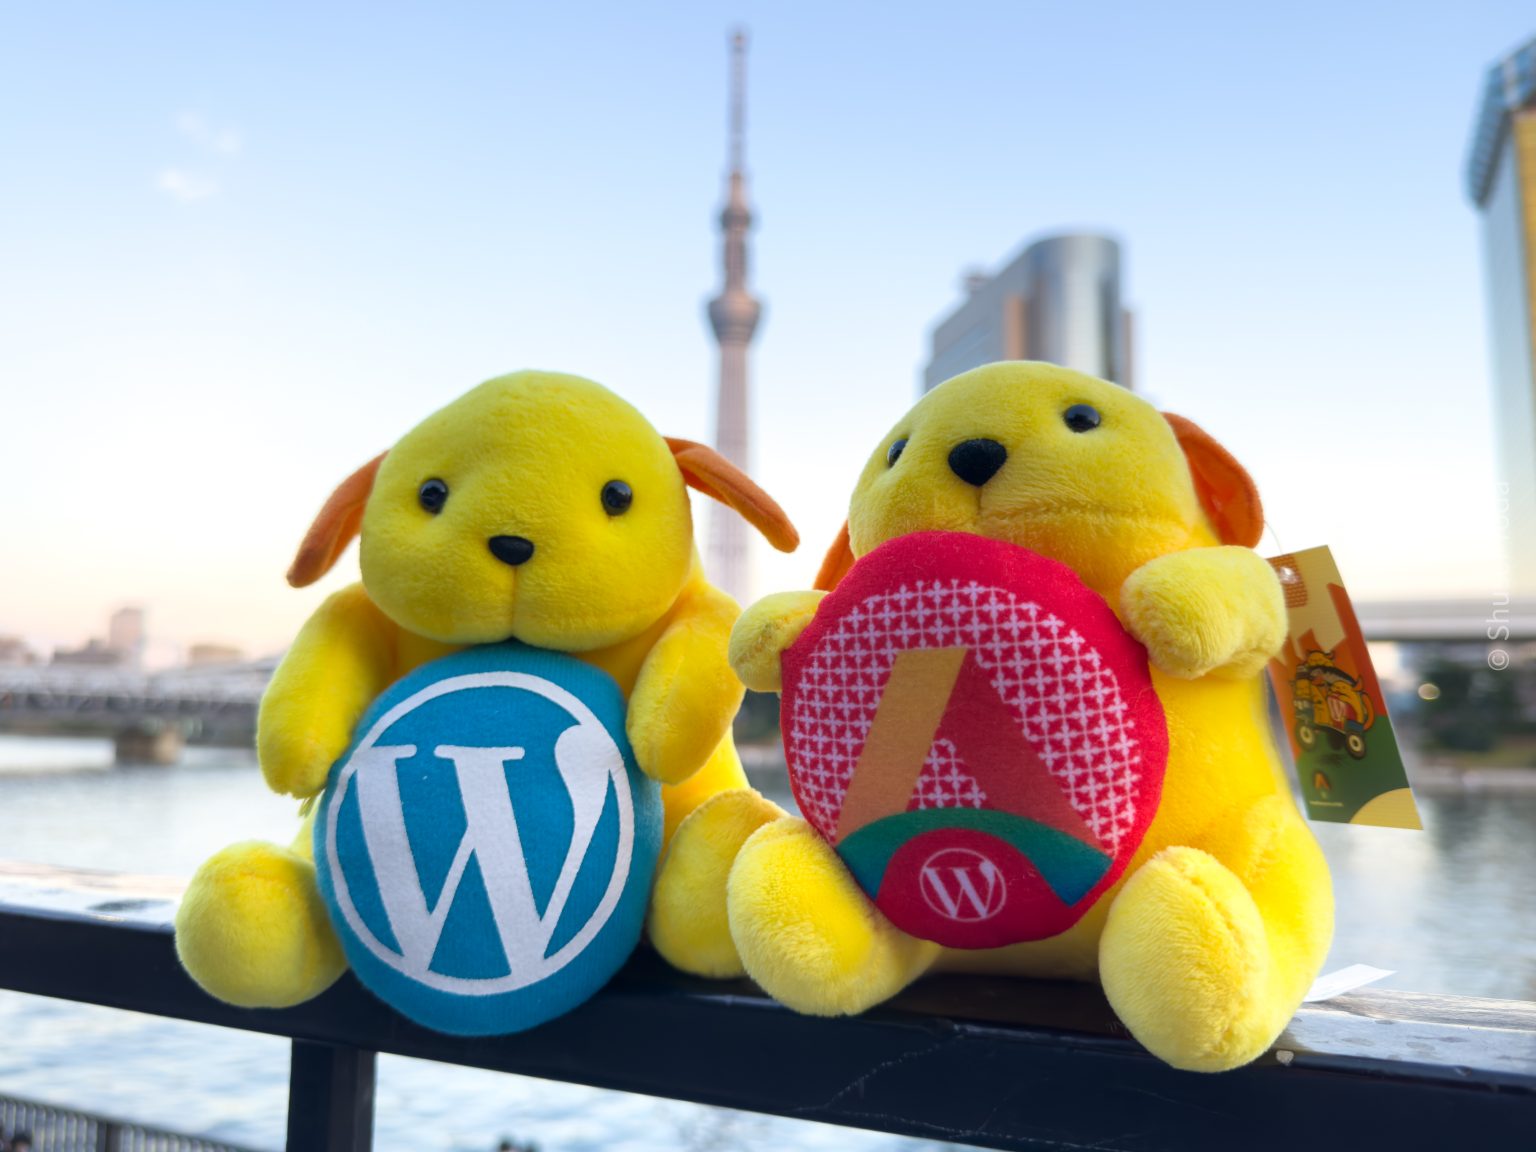 Wapuu and WordCamp Asia Wapuu with Tokyo Skytree building in the background. Photo contributed by Shusei Toda to the WordPress Photo Directory.